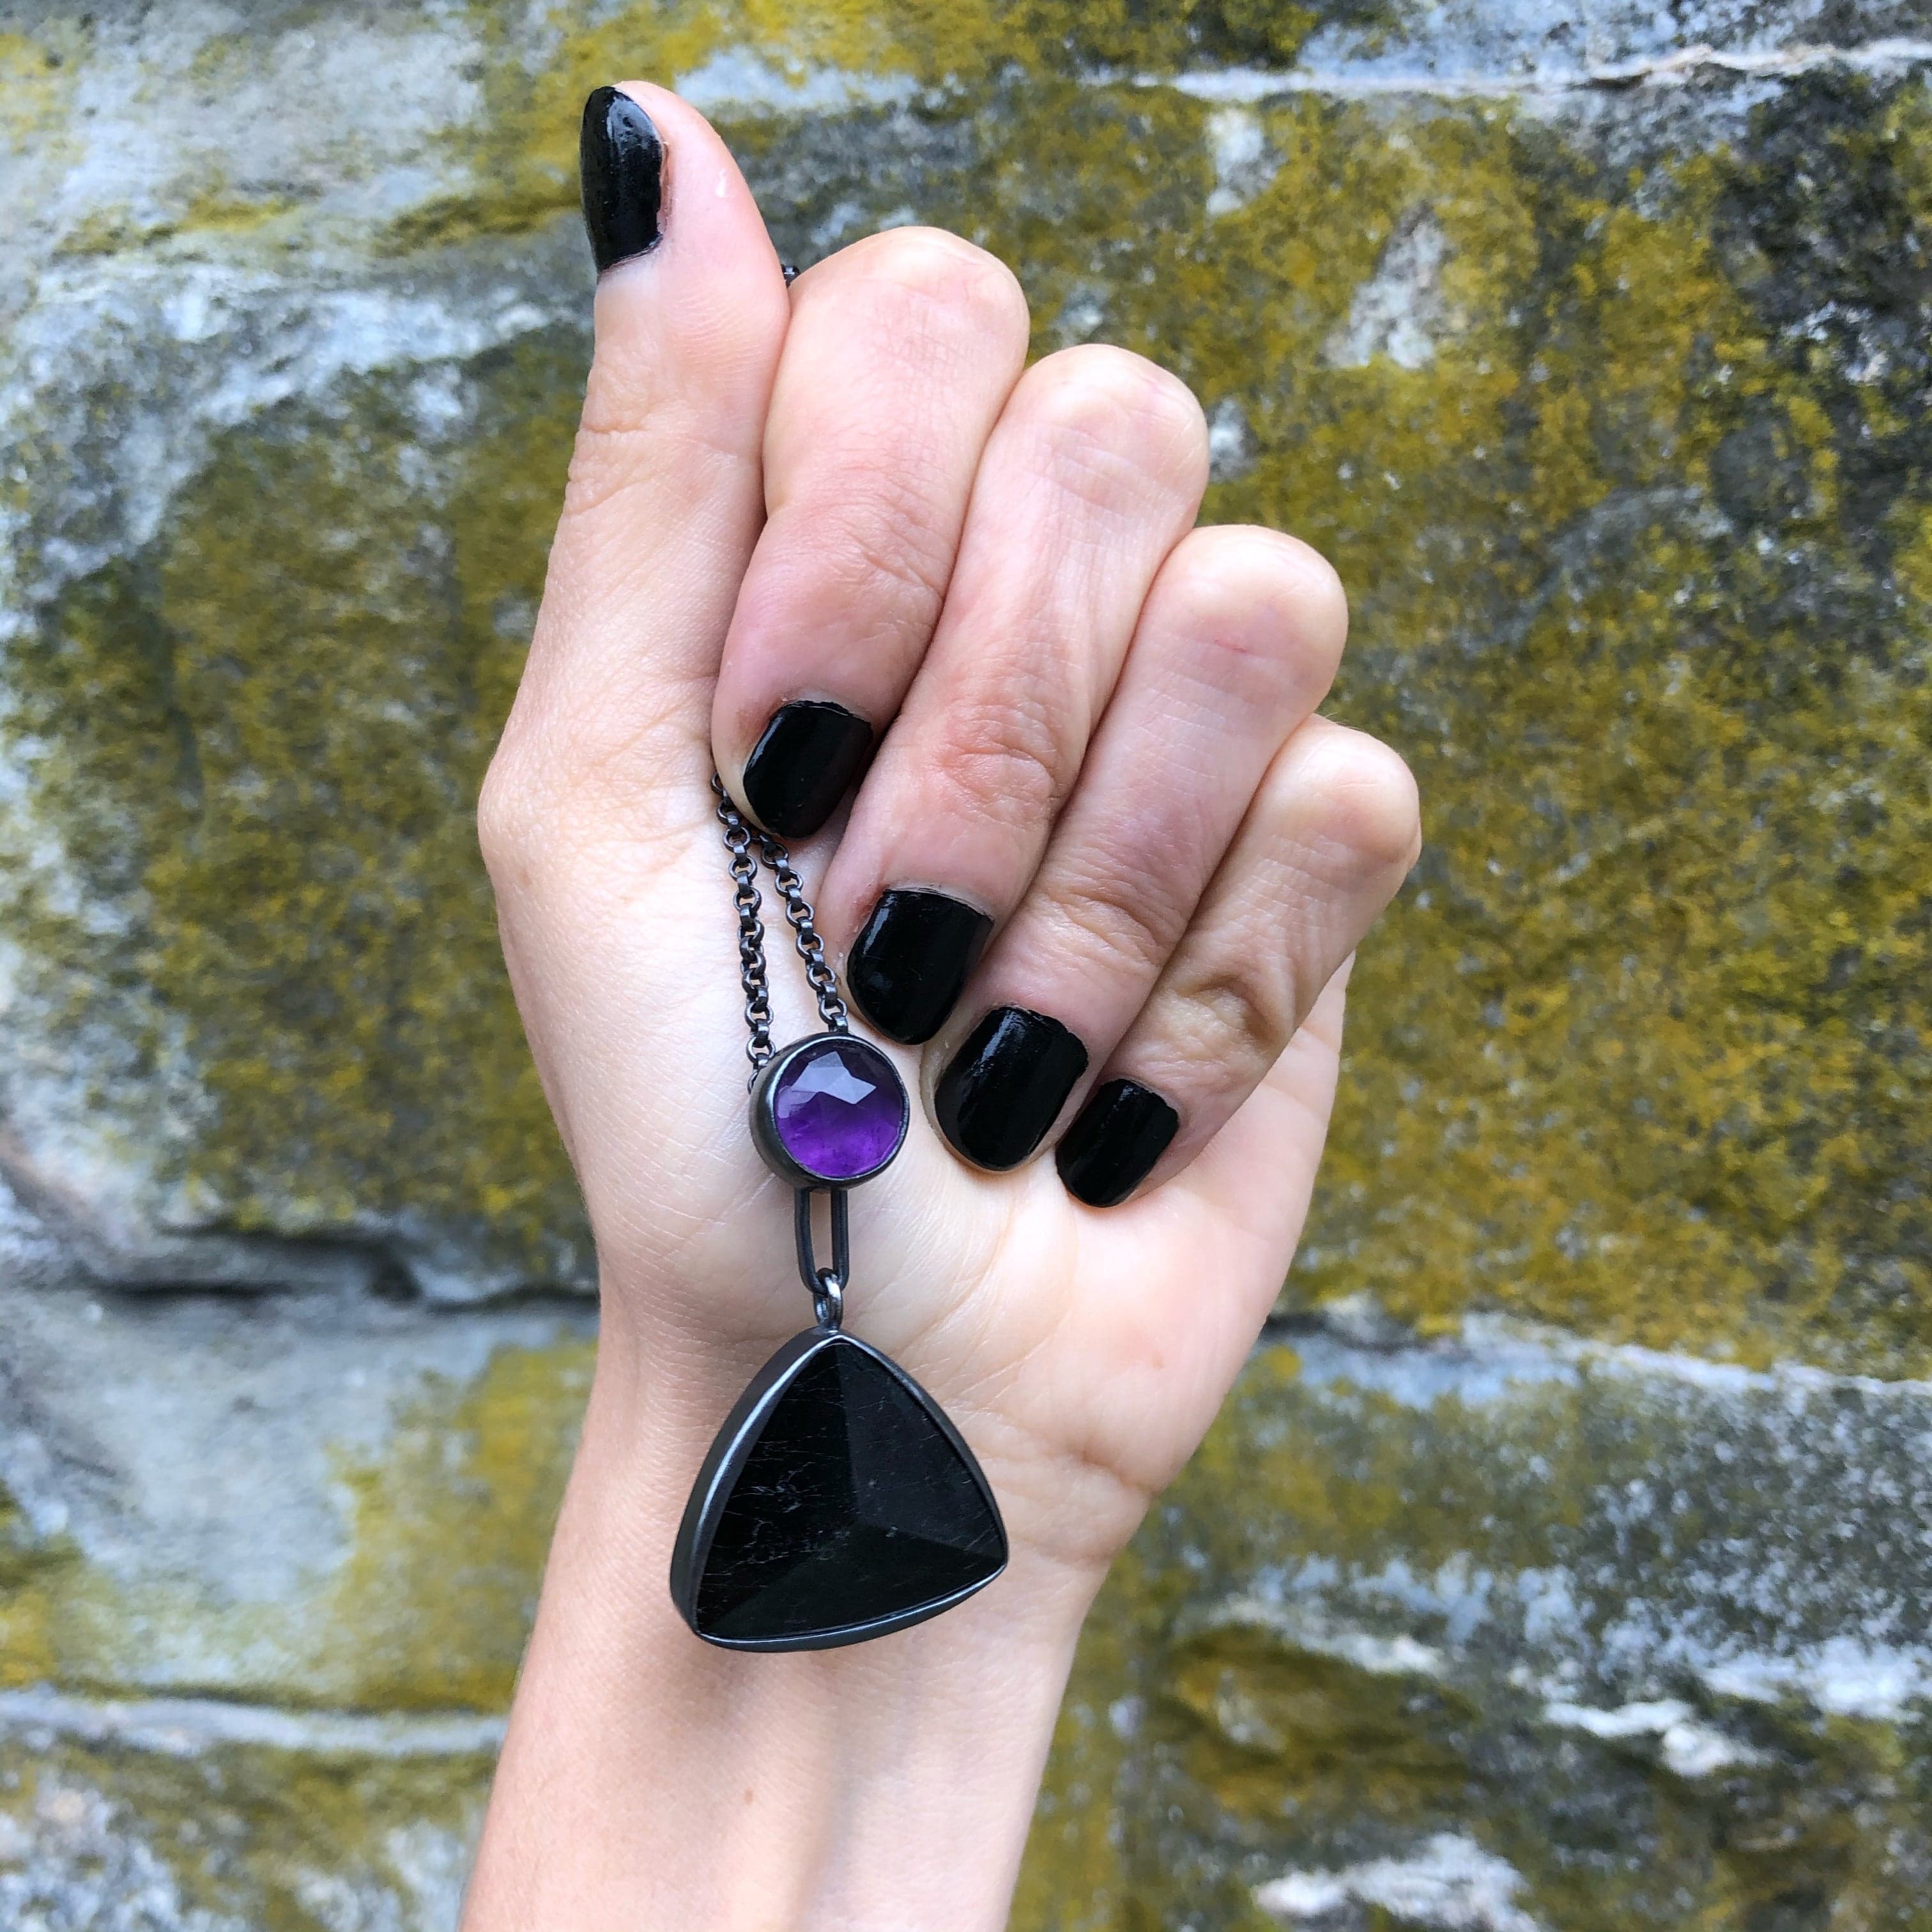 Amethyst + Black Tourmaline Talisman Pendant.  Part of the Season of the Witch Collection by Alex Lozier Jewelry.